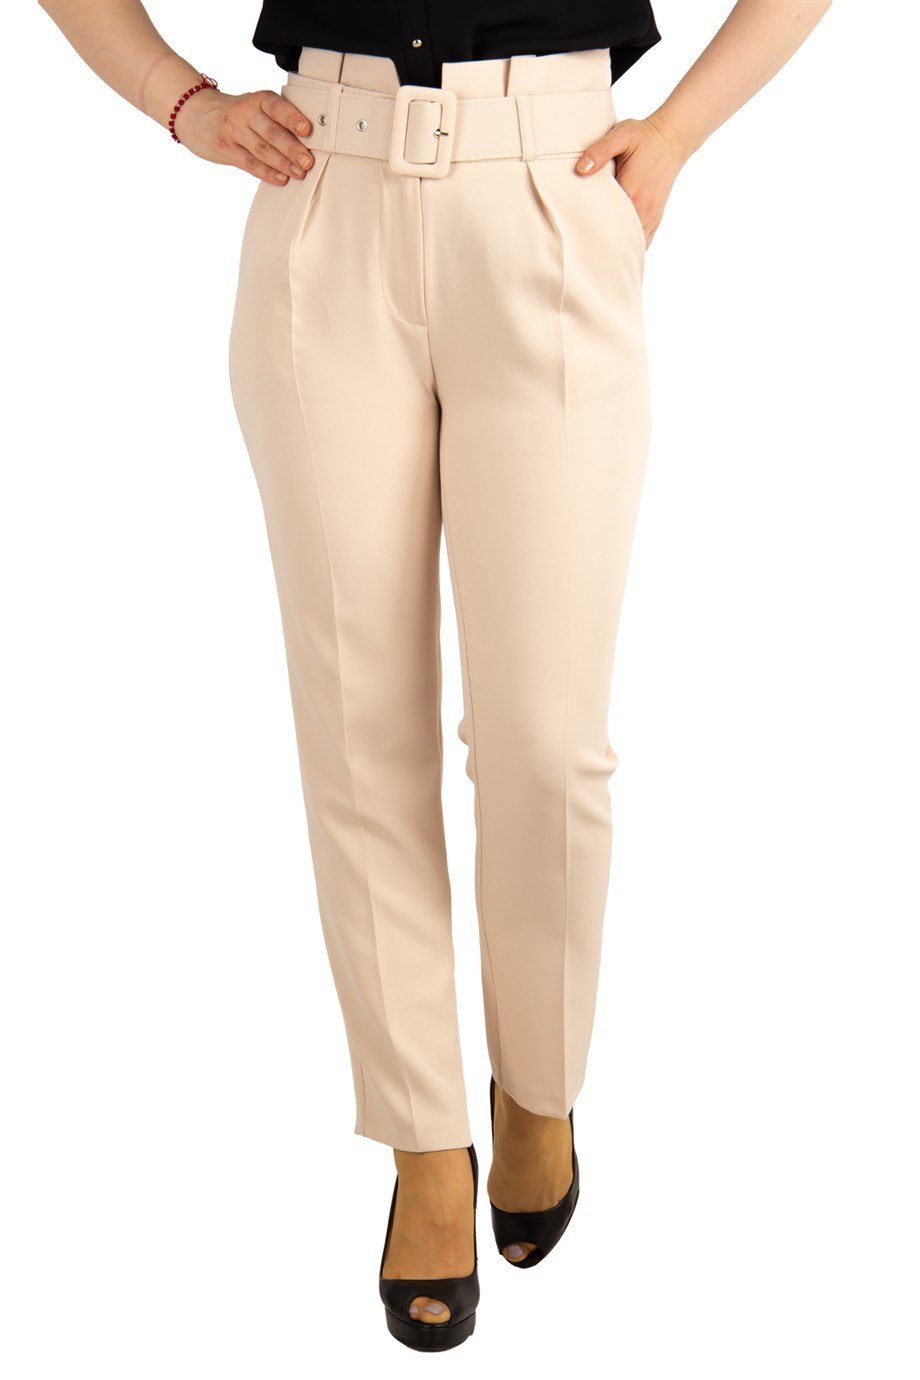 Beige trousers with side pockets and belt – R.a. Boutique